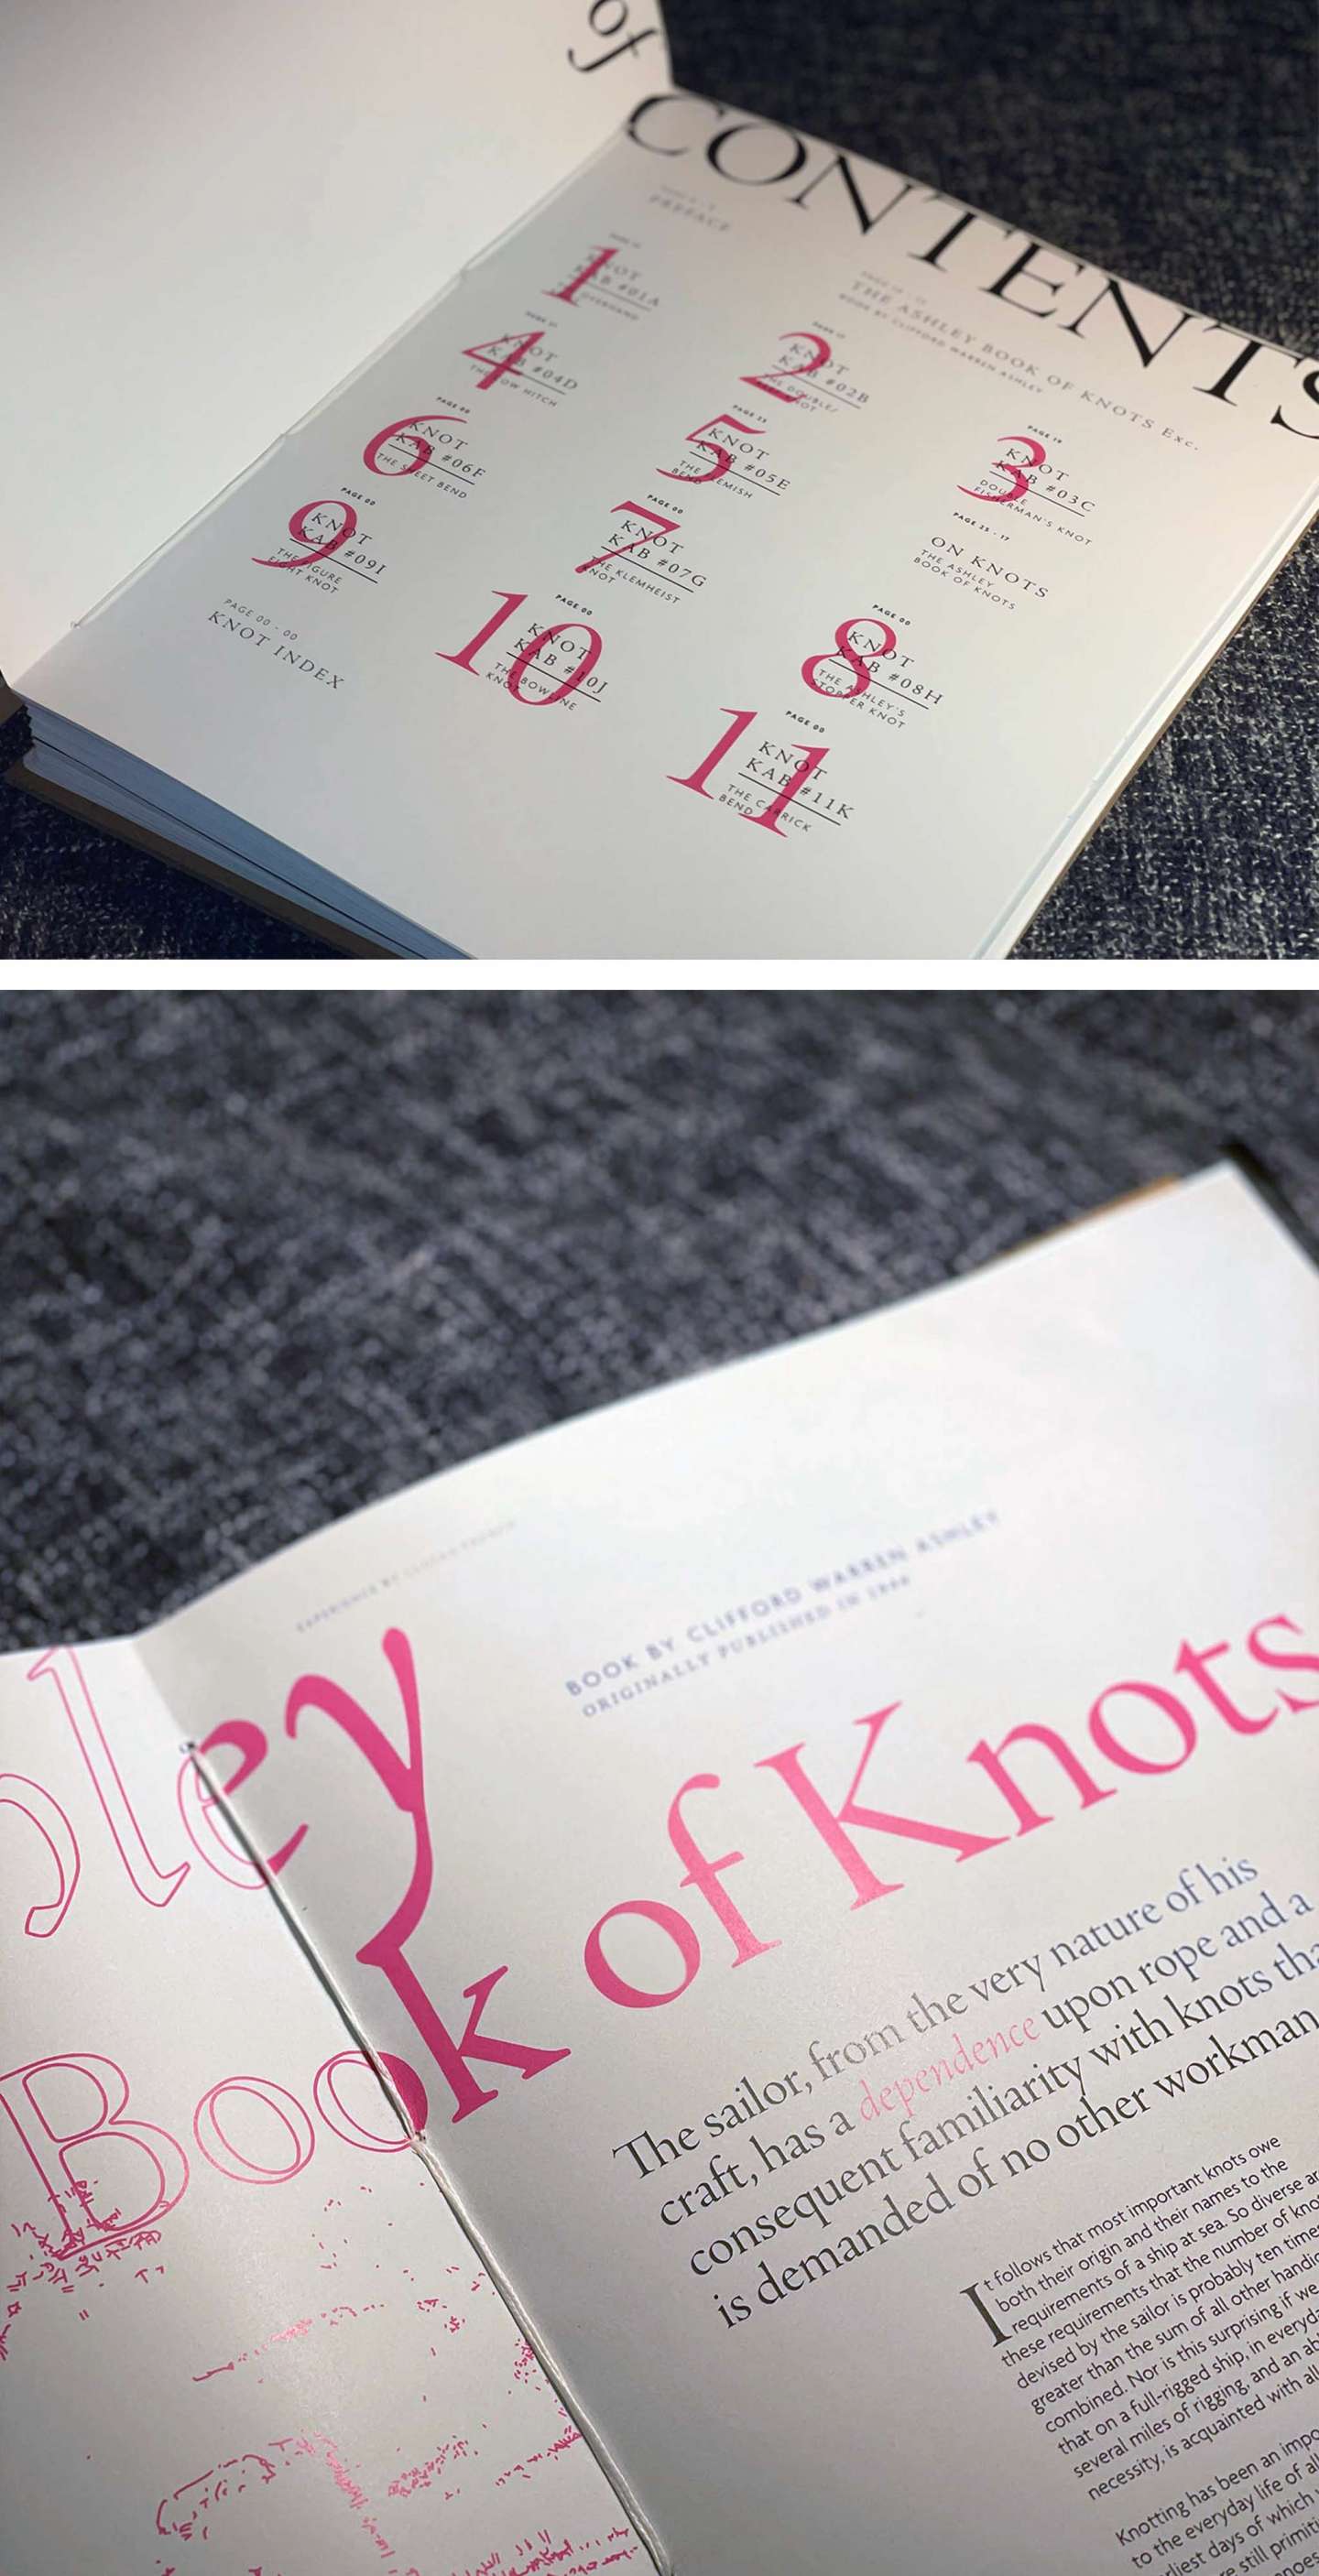 KNOT ABOUT BOOKS: A BOOK ABOUT KNOTS